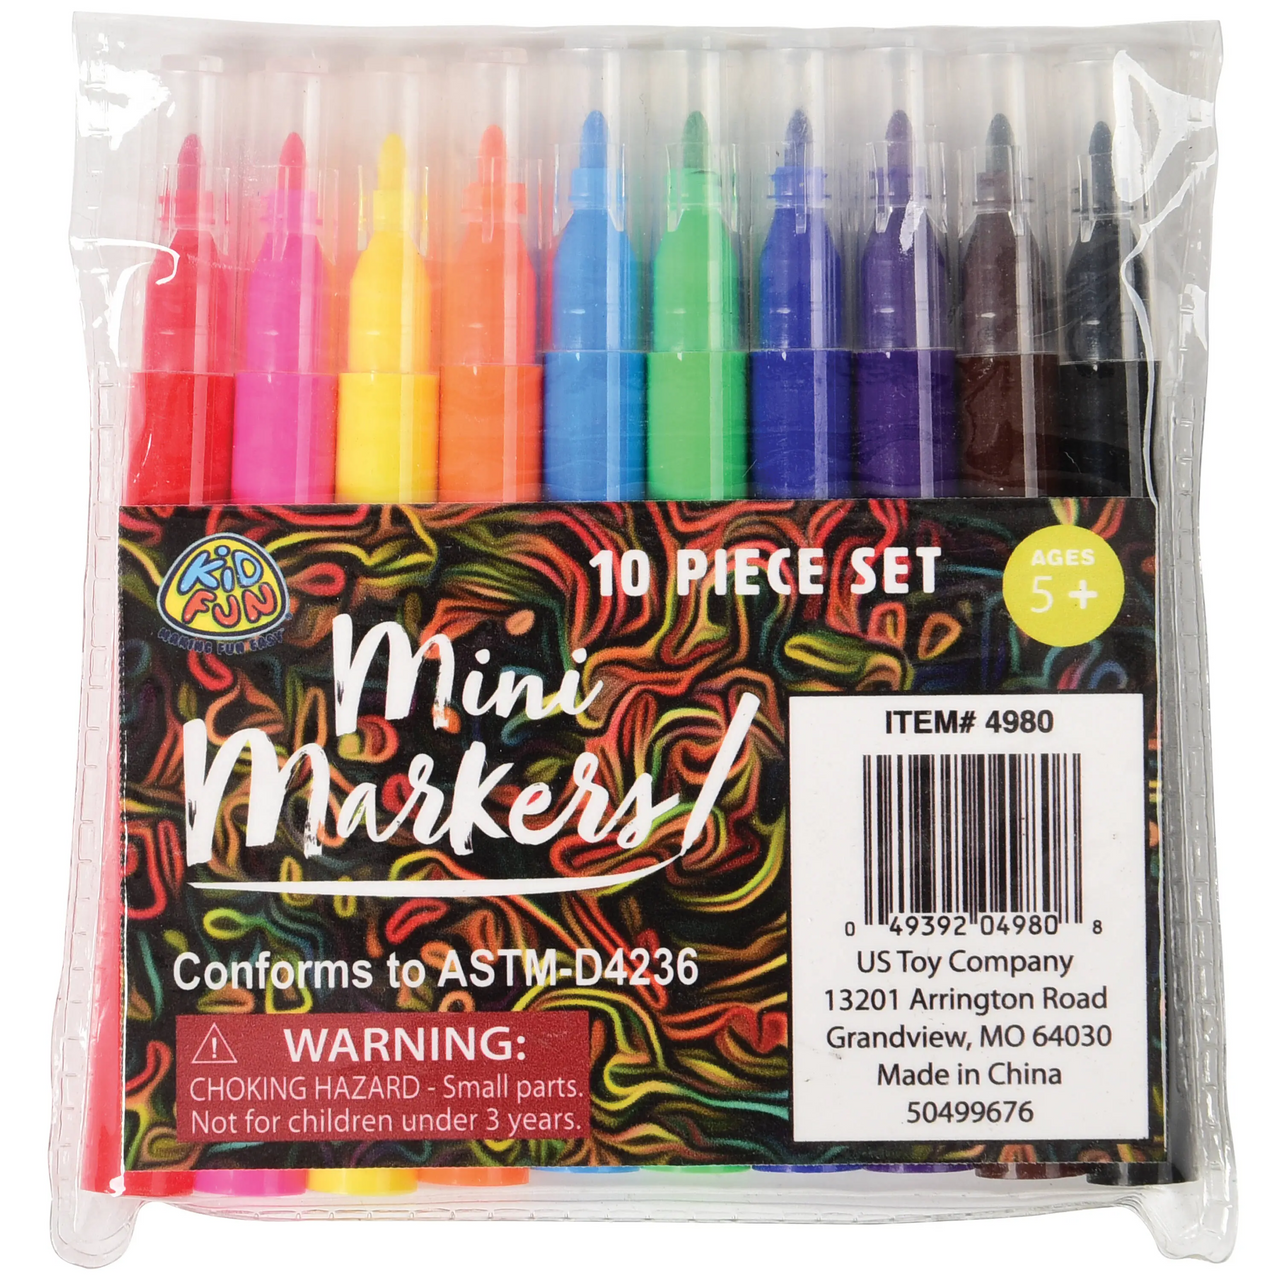 Worlds smallest markers set